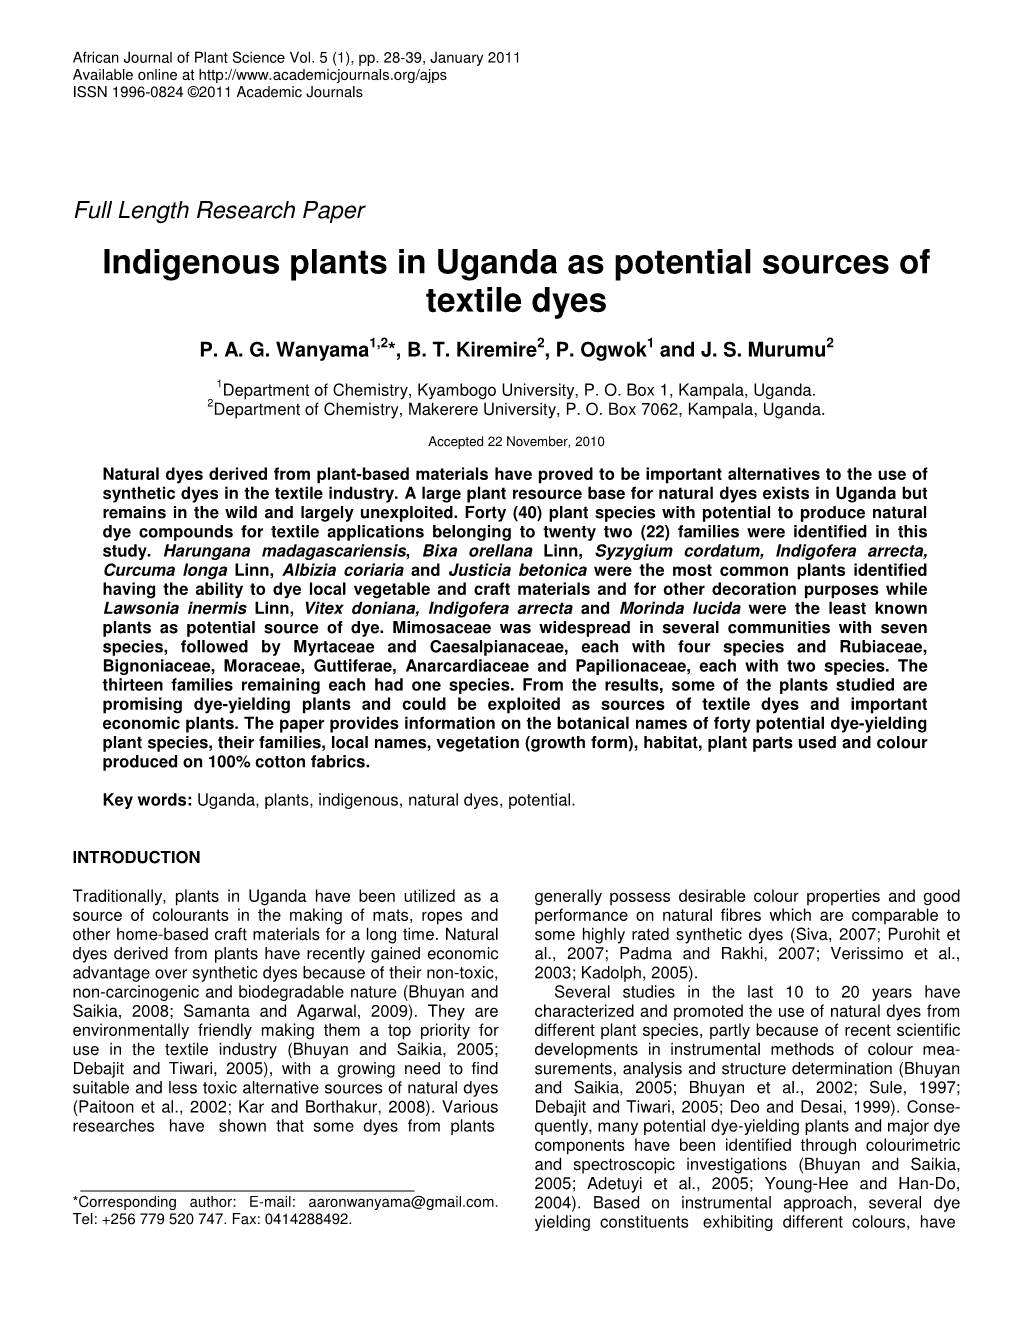 Indigenous Plants in Uganda As Potential Sources of Textile Dyes